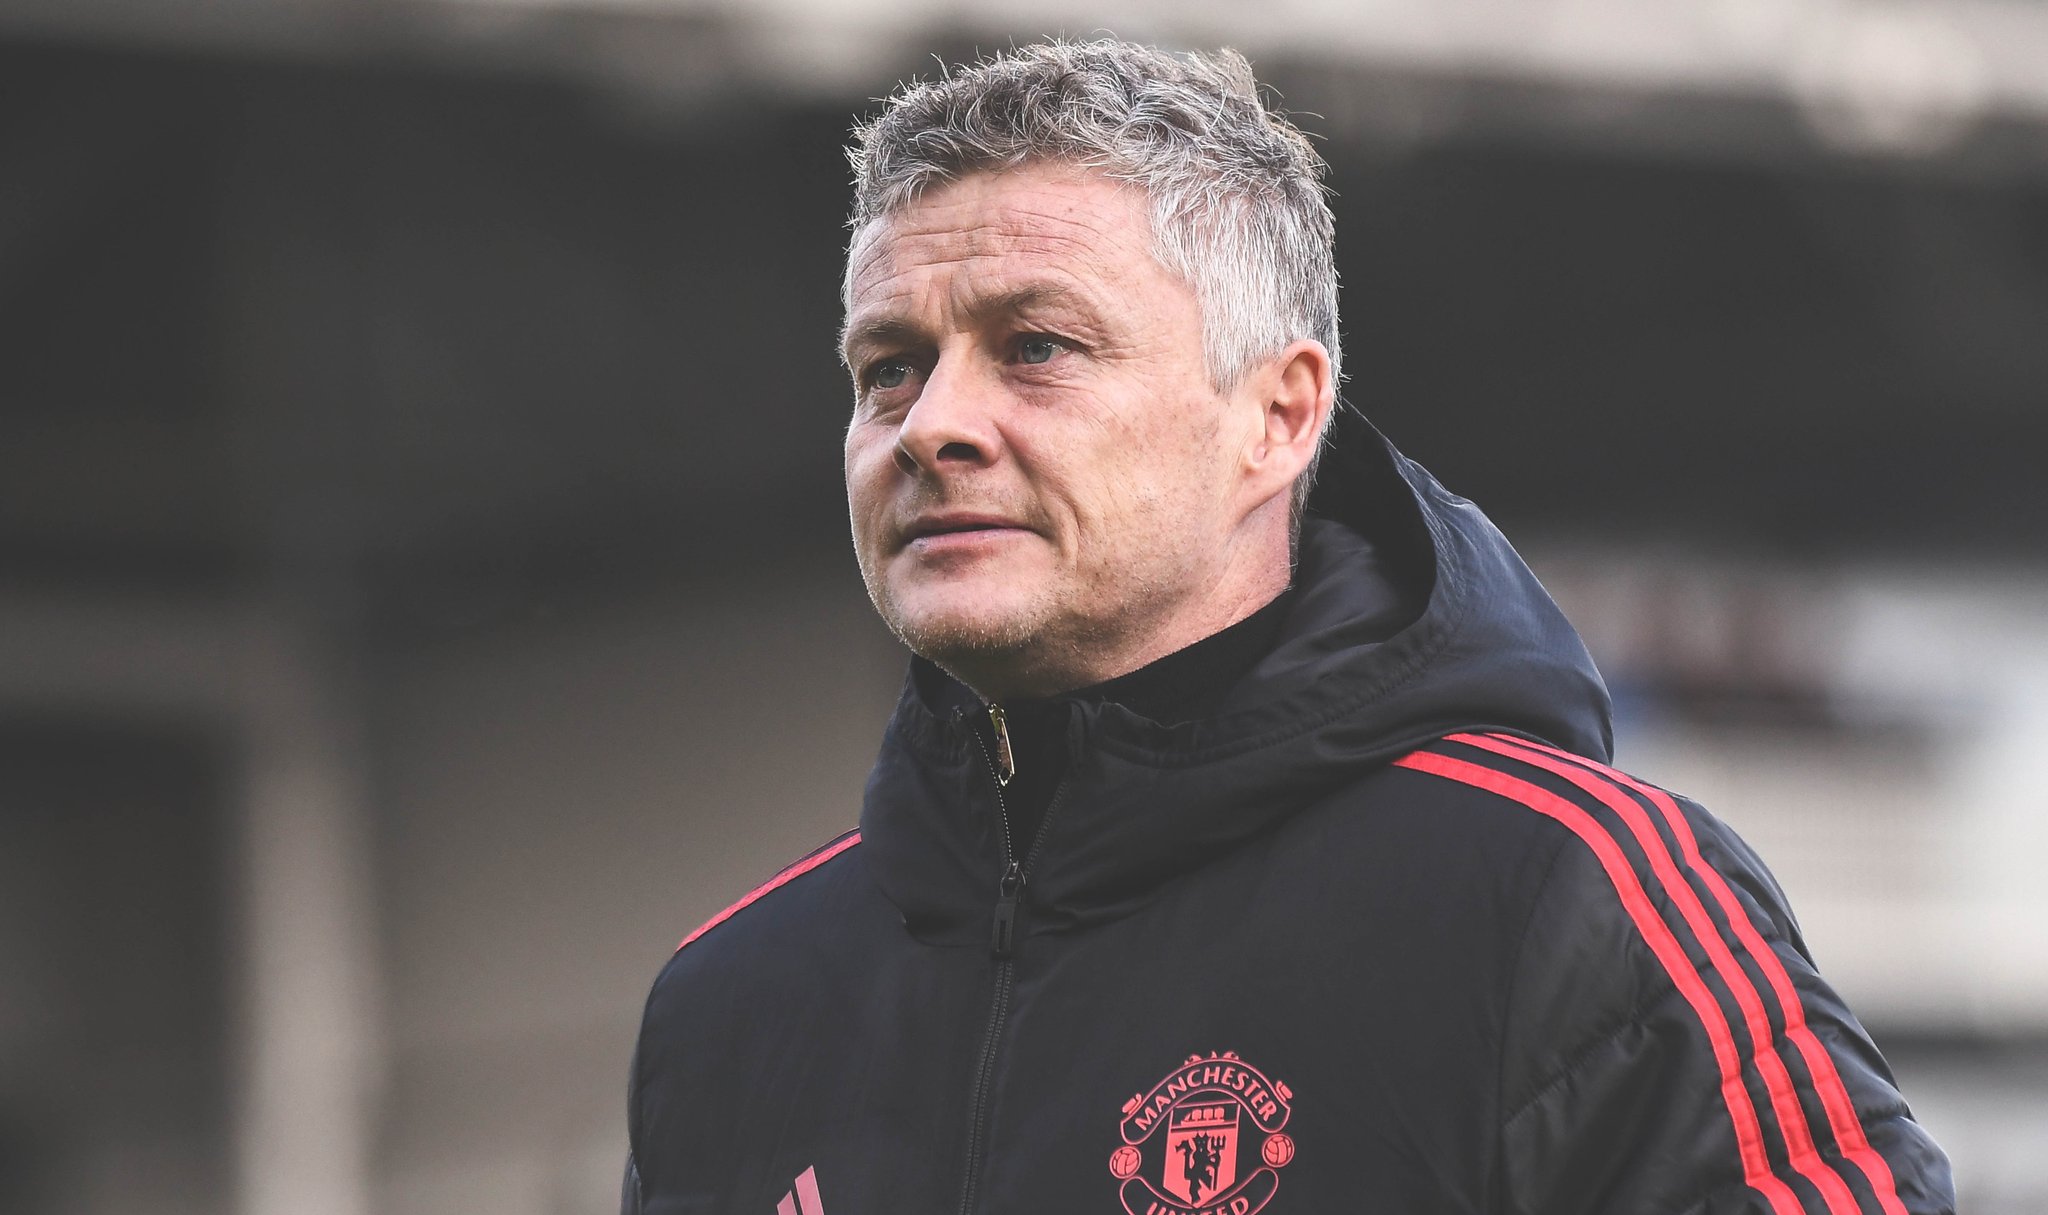 Solskjaer hits out at Van Persie again after Man Utd’s draw against Wolves